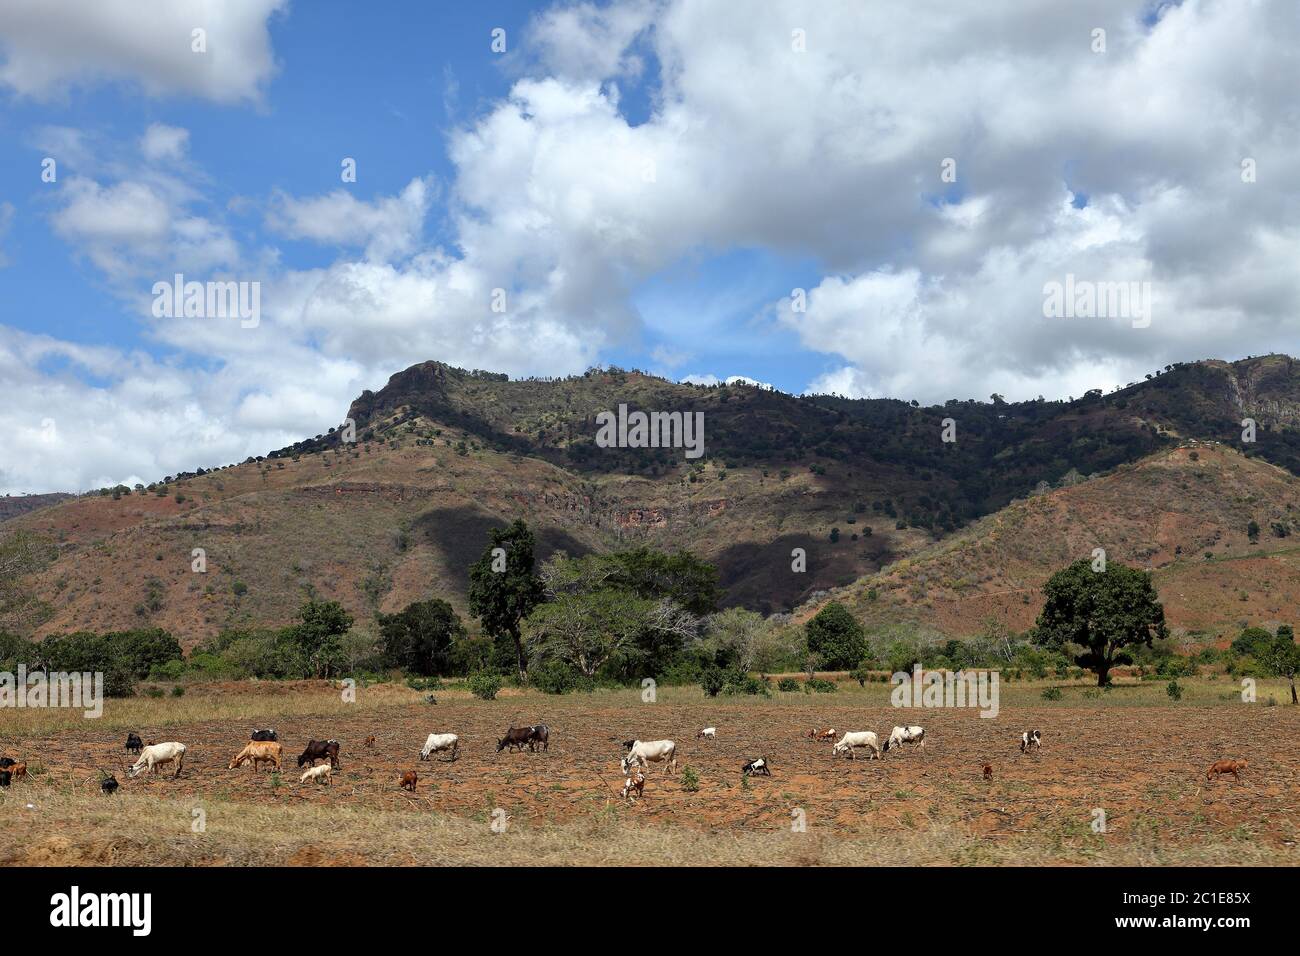 Cows and cattle in Tanzania Stock Photo